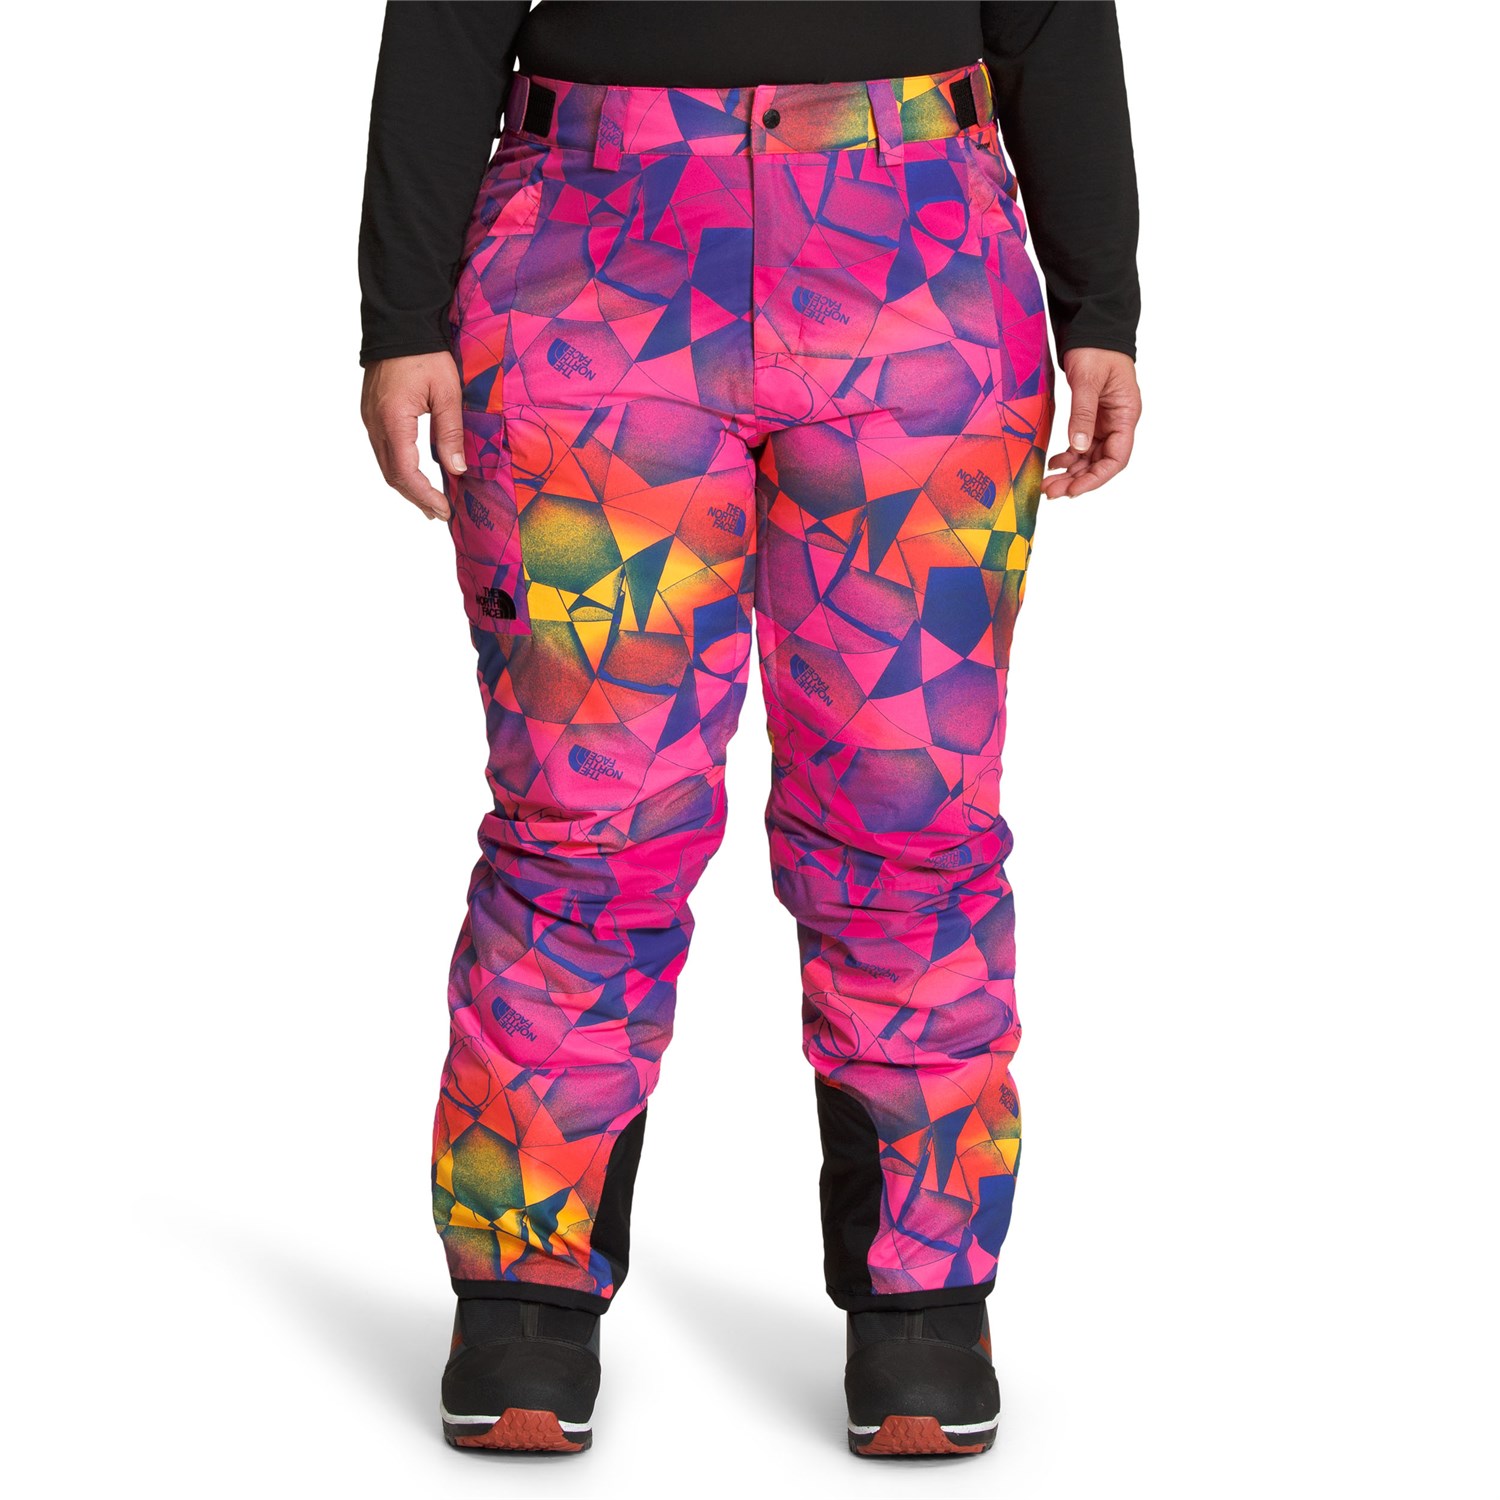 Брюки The North Face Freedom Insulated Plus Tall, цвет Mr. Pink Expedition Print брюки the north face freedom insulated plus tall цвет mr pink expedition print